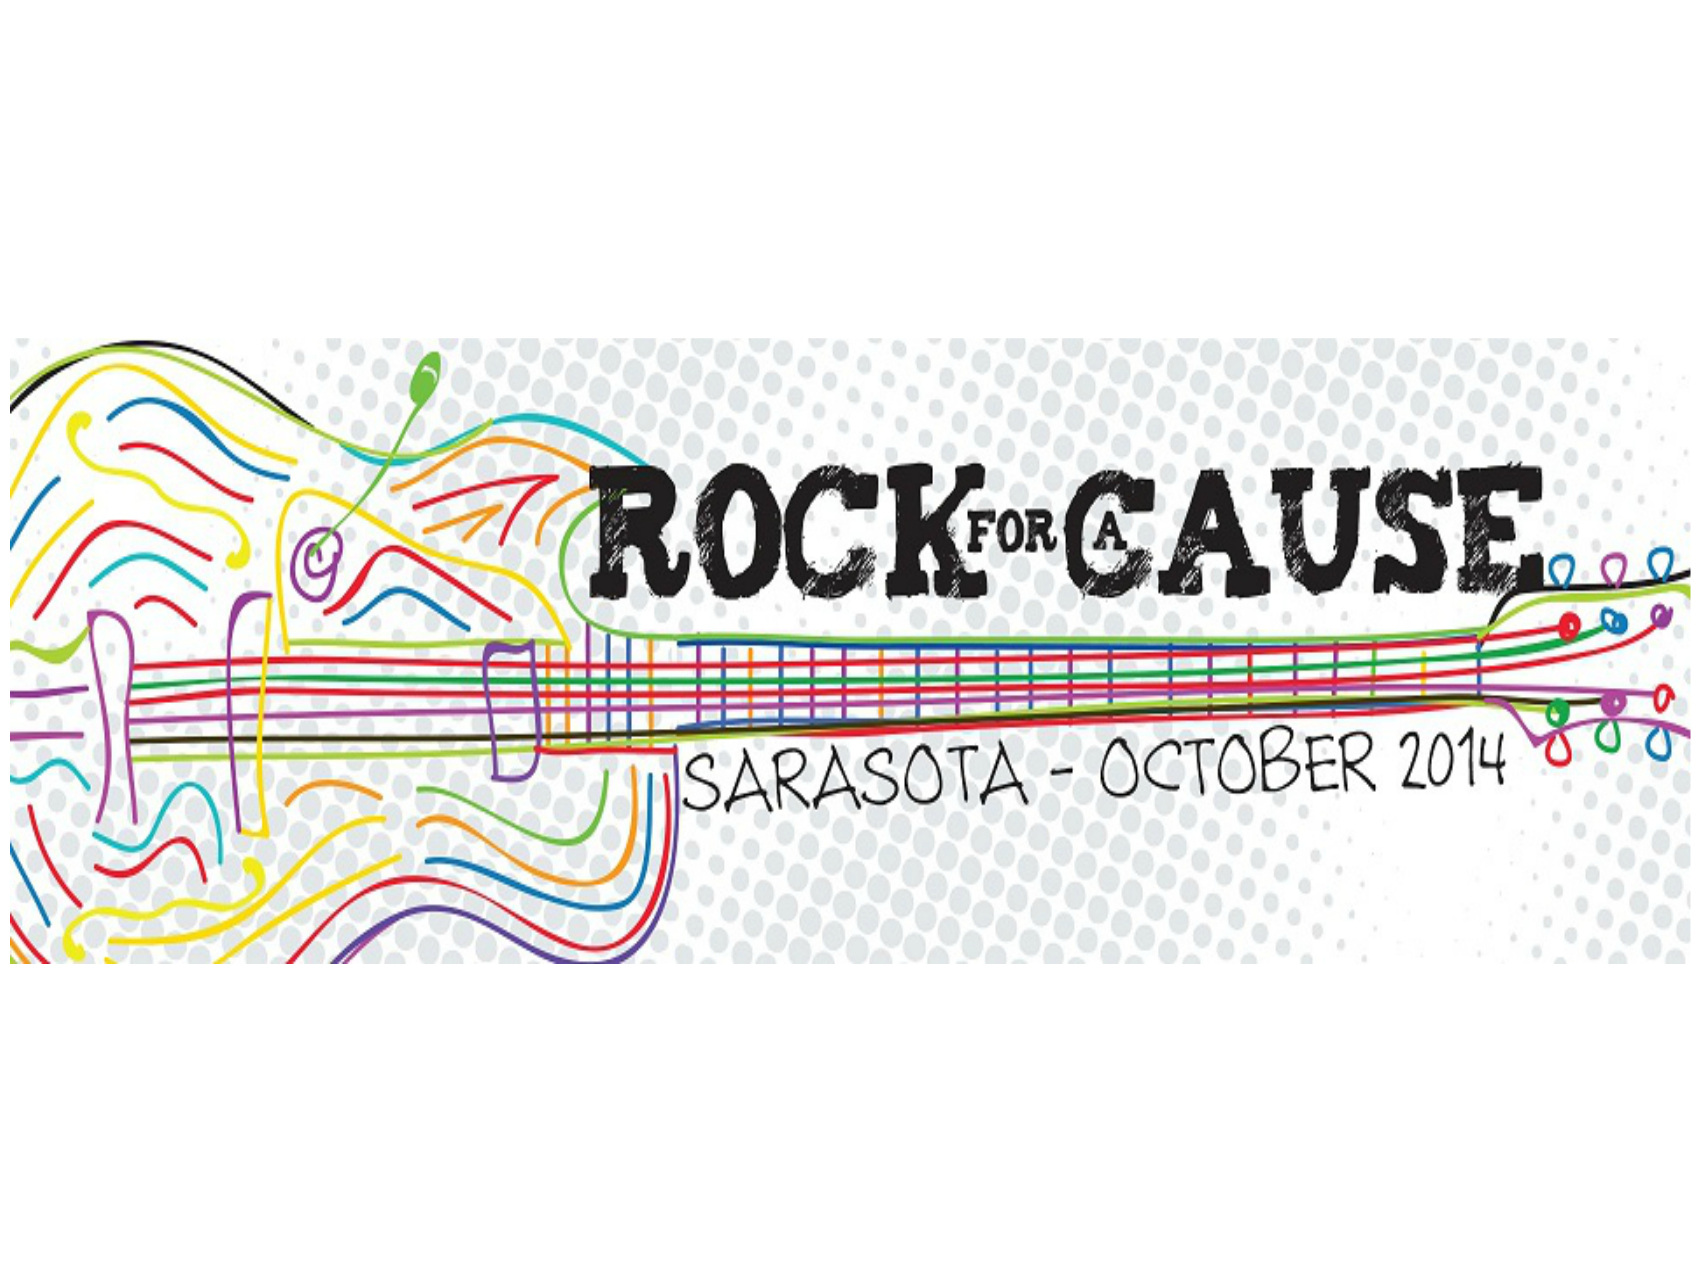 S-One Sponsors Sarasota’s Rock for a Cause